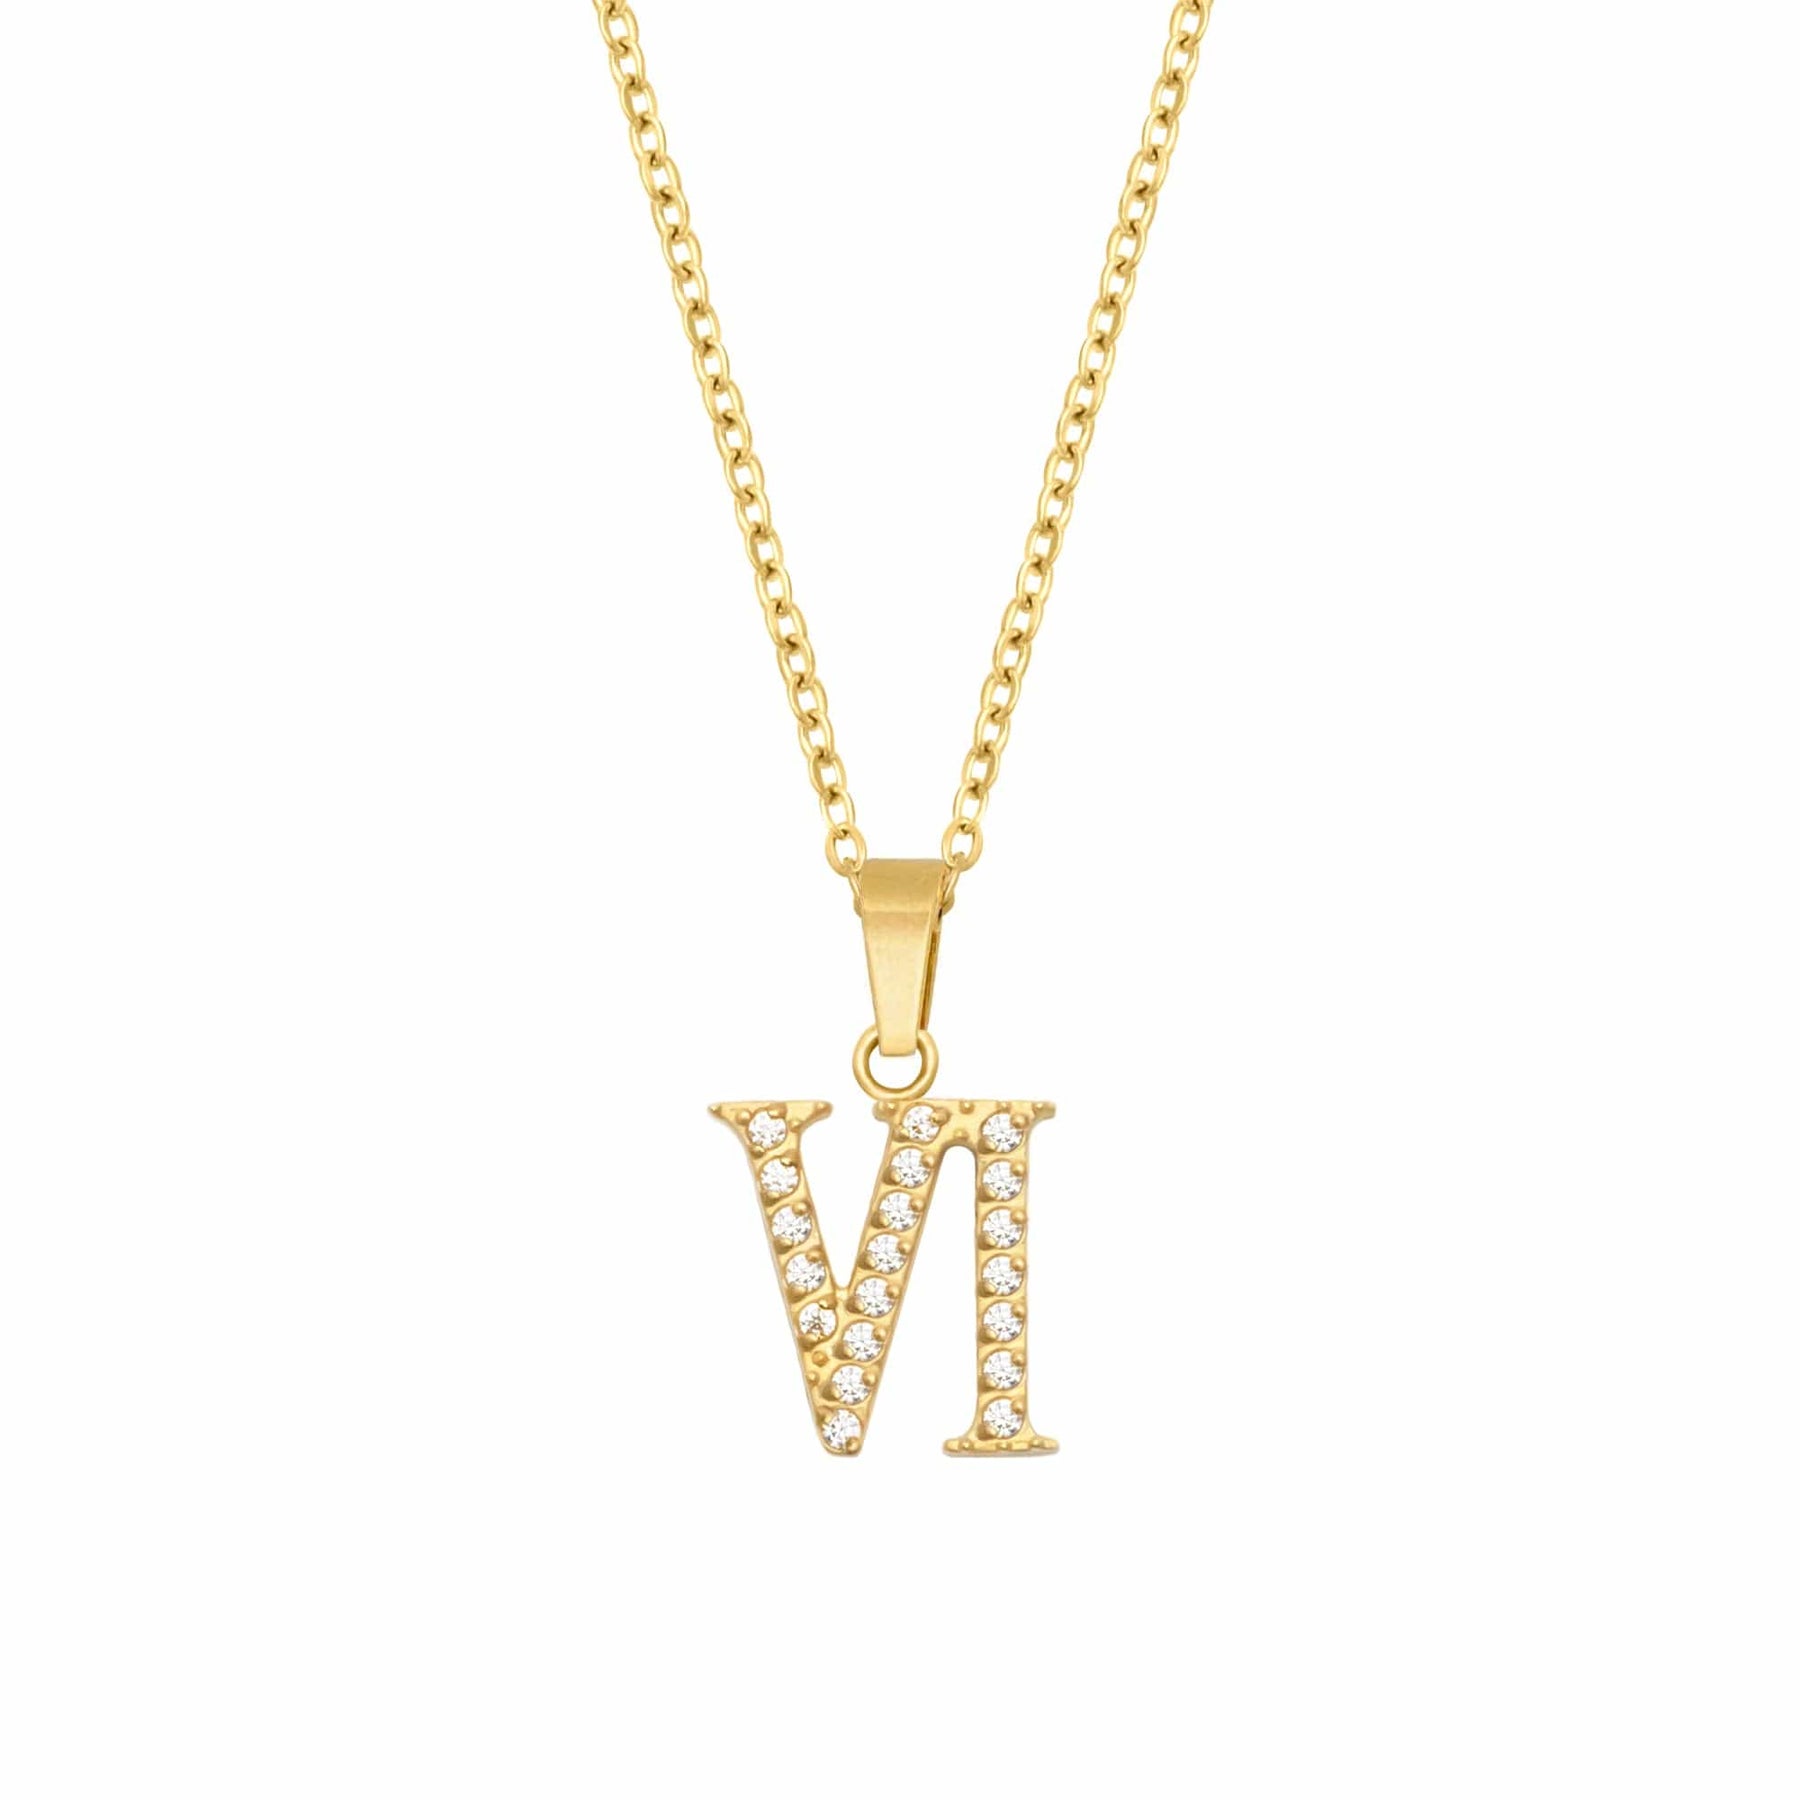 BohoMoon Stainless Steel Roman Numerals Necklace Gold / VI